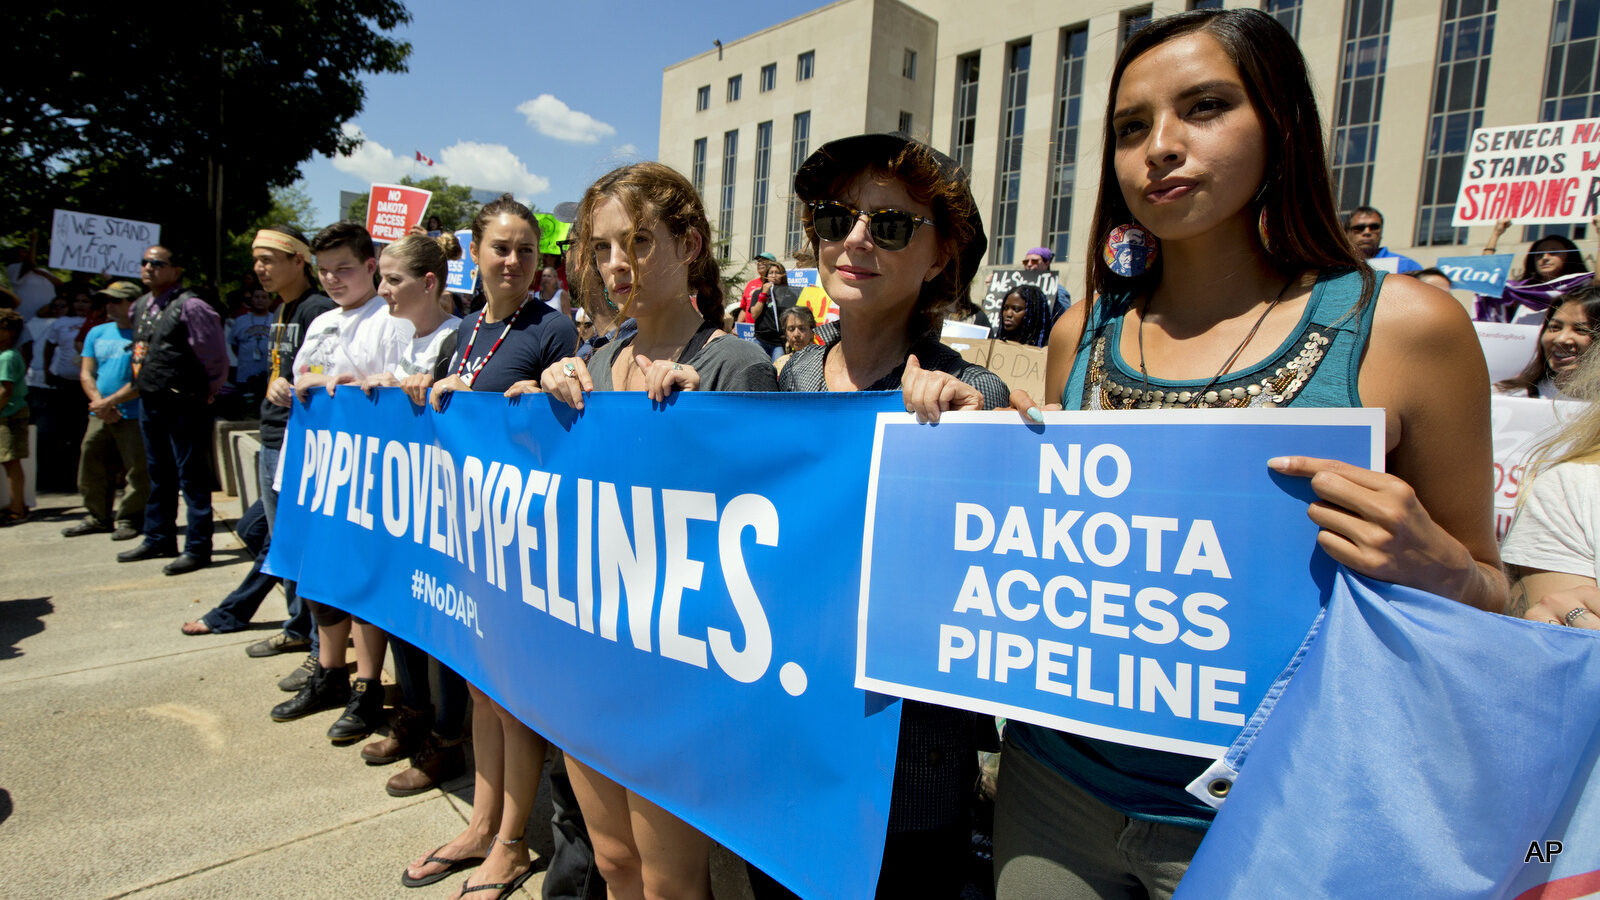 Actress Shailene Woodley, fourth from right to right, Riley Keough the eldest grandchild of Elvis and Priscilla Presley, actress Susan Sarandon and Standing Rock Sioux Tribe member Bobbi Jean Three Lakes, right, participate in a rally outside the US District Court in Washington, Wednesday, Aug. 24, 2016, in solidarity with the Standing Rock Sioux Tribe in their lawsuit against the Army Corps of Engineers to protect their water and land from the Dakota Access Pipeline.